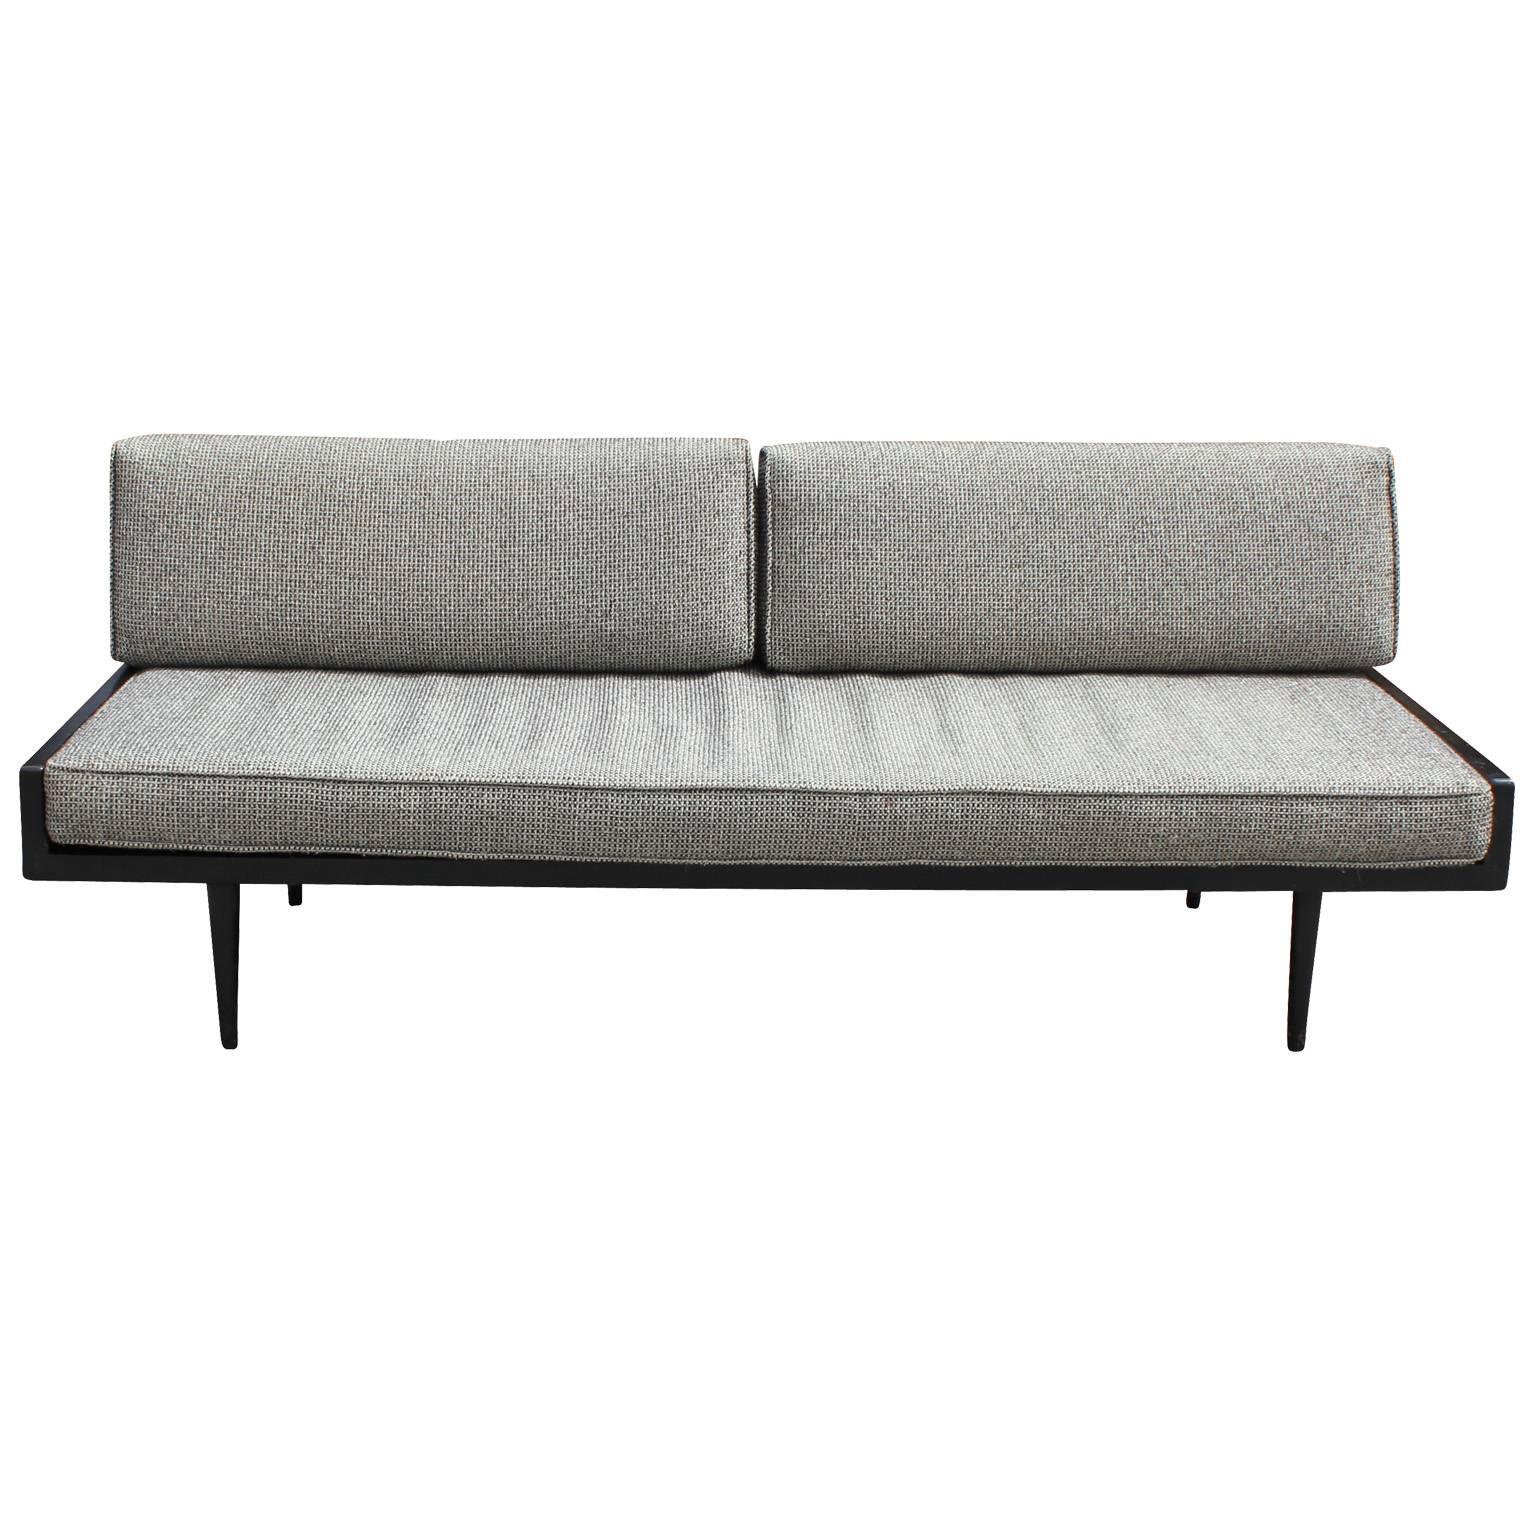 armless daybed